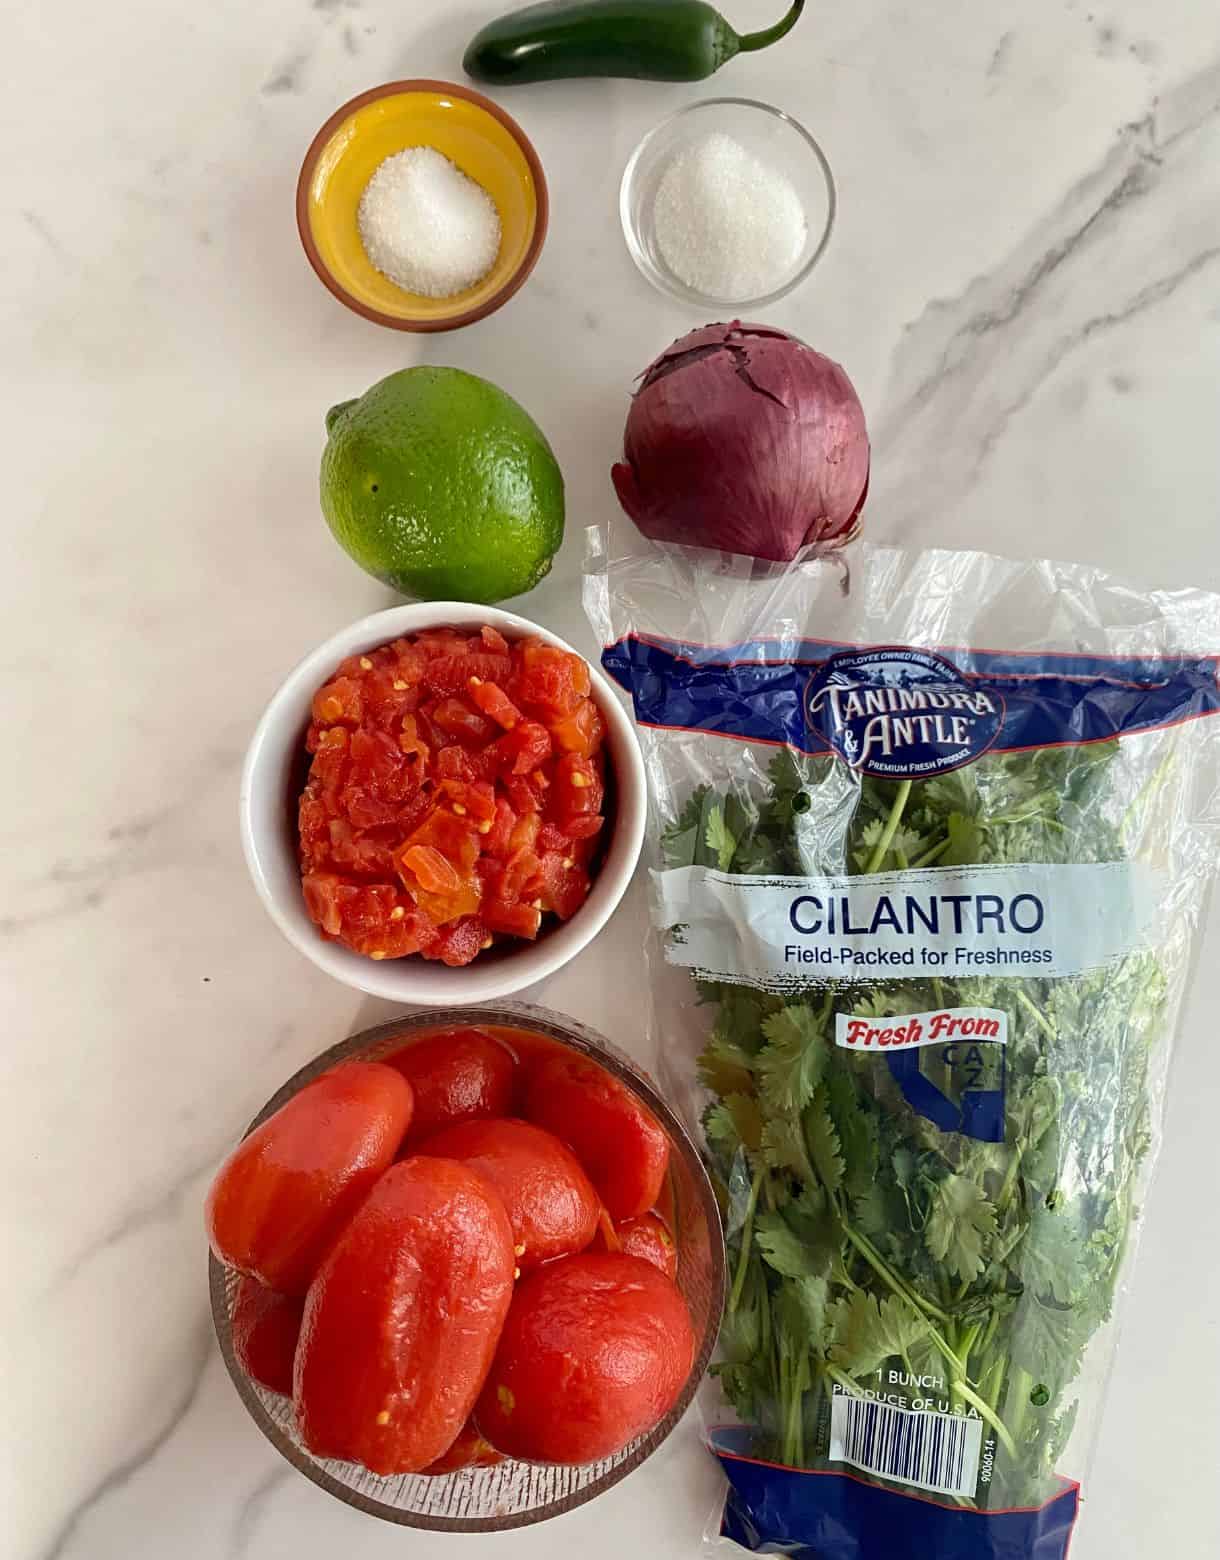 Ingredients for Jalapeno Salsa. A jalapeno, salt, sugar, lime, red onion, canned diced tomatoes with chiles, canned whole tomatoes and cilantro.